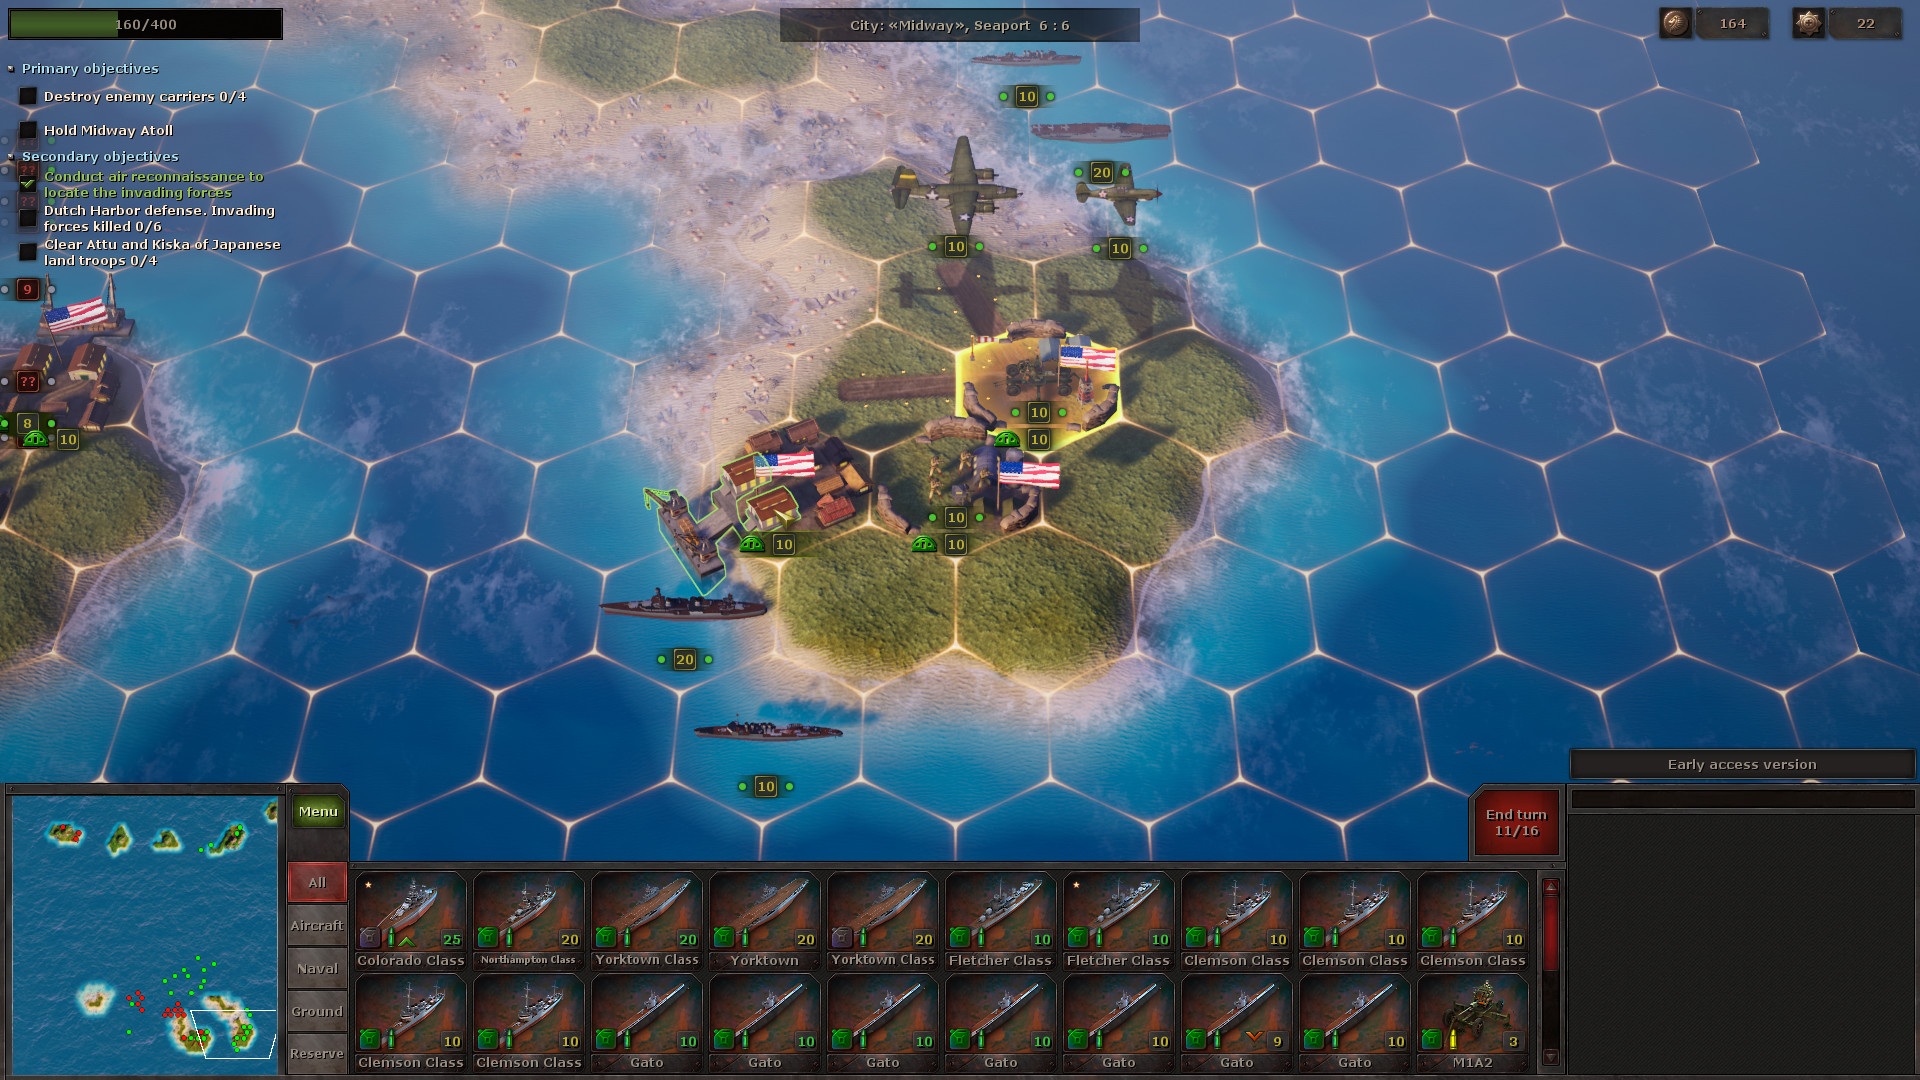 Strategic Mind: The Pacific Free Download